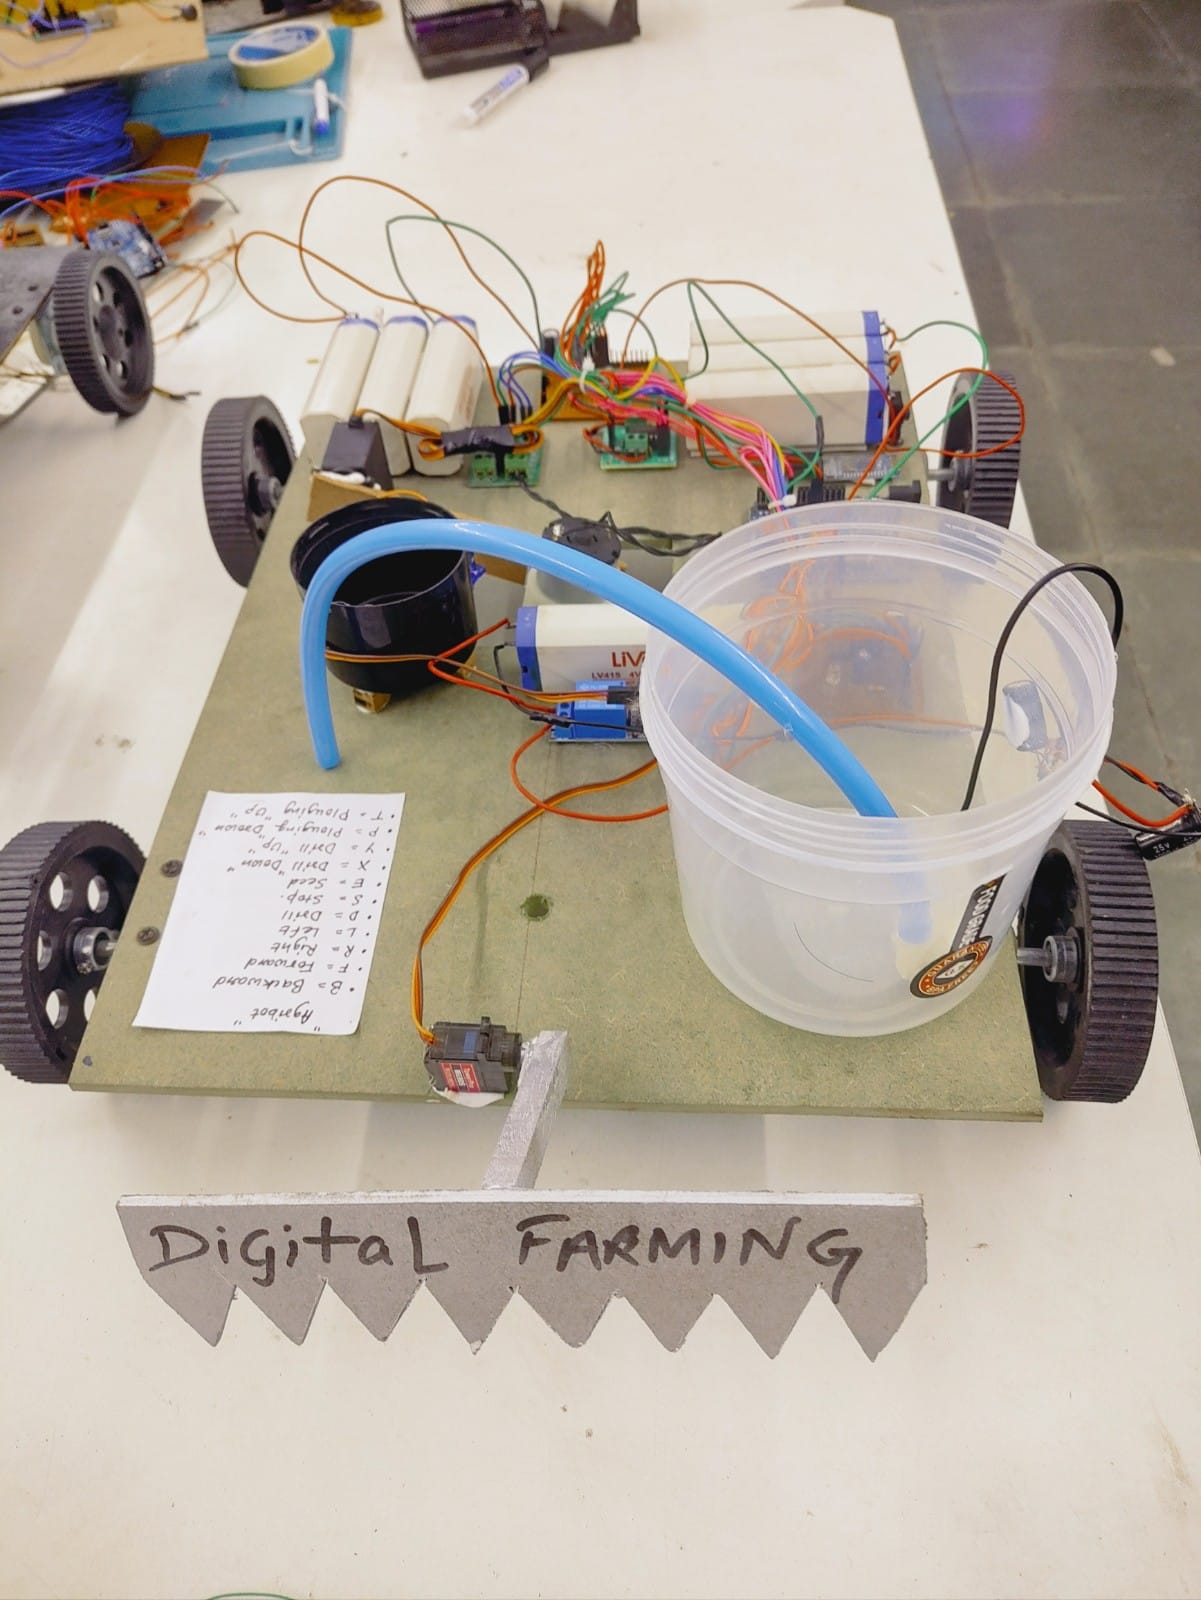 WIRELESS AGRICULTURE ROBOT USING ARDUINO (AGRIBOT)